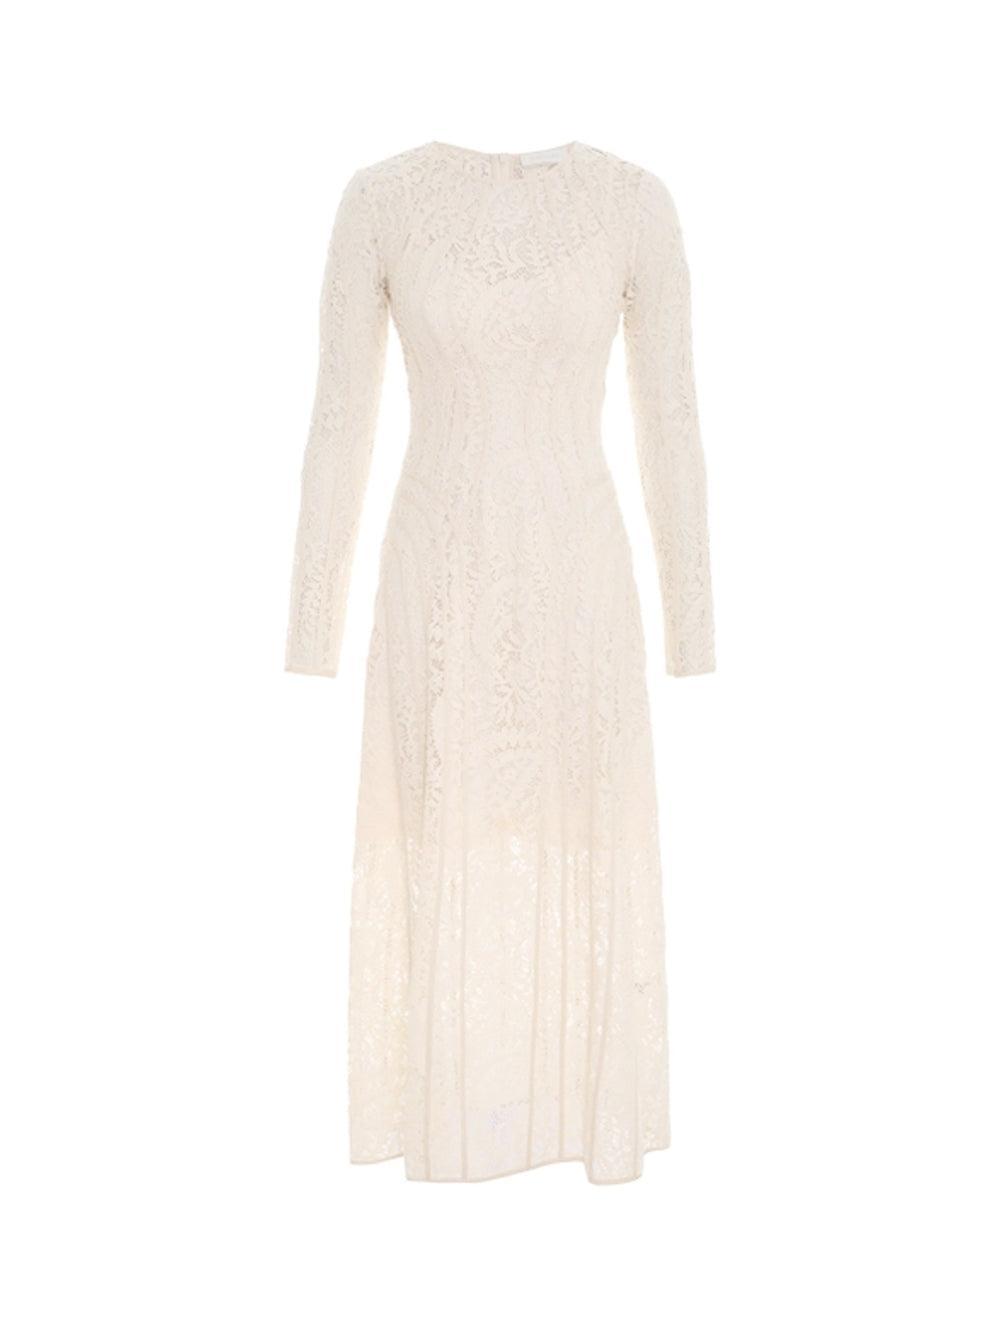 Zimmermann Women's Devi Panelled Lace Midi Dress in Cream size 0 Product Image